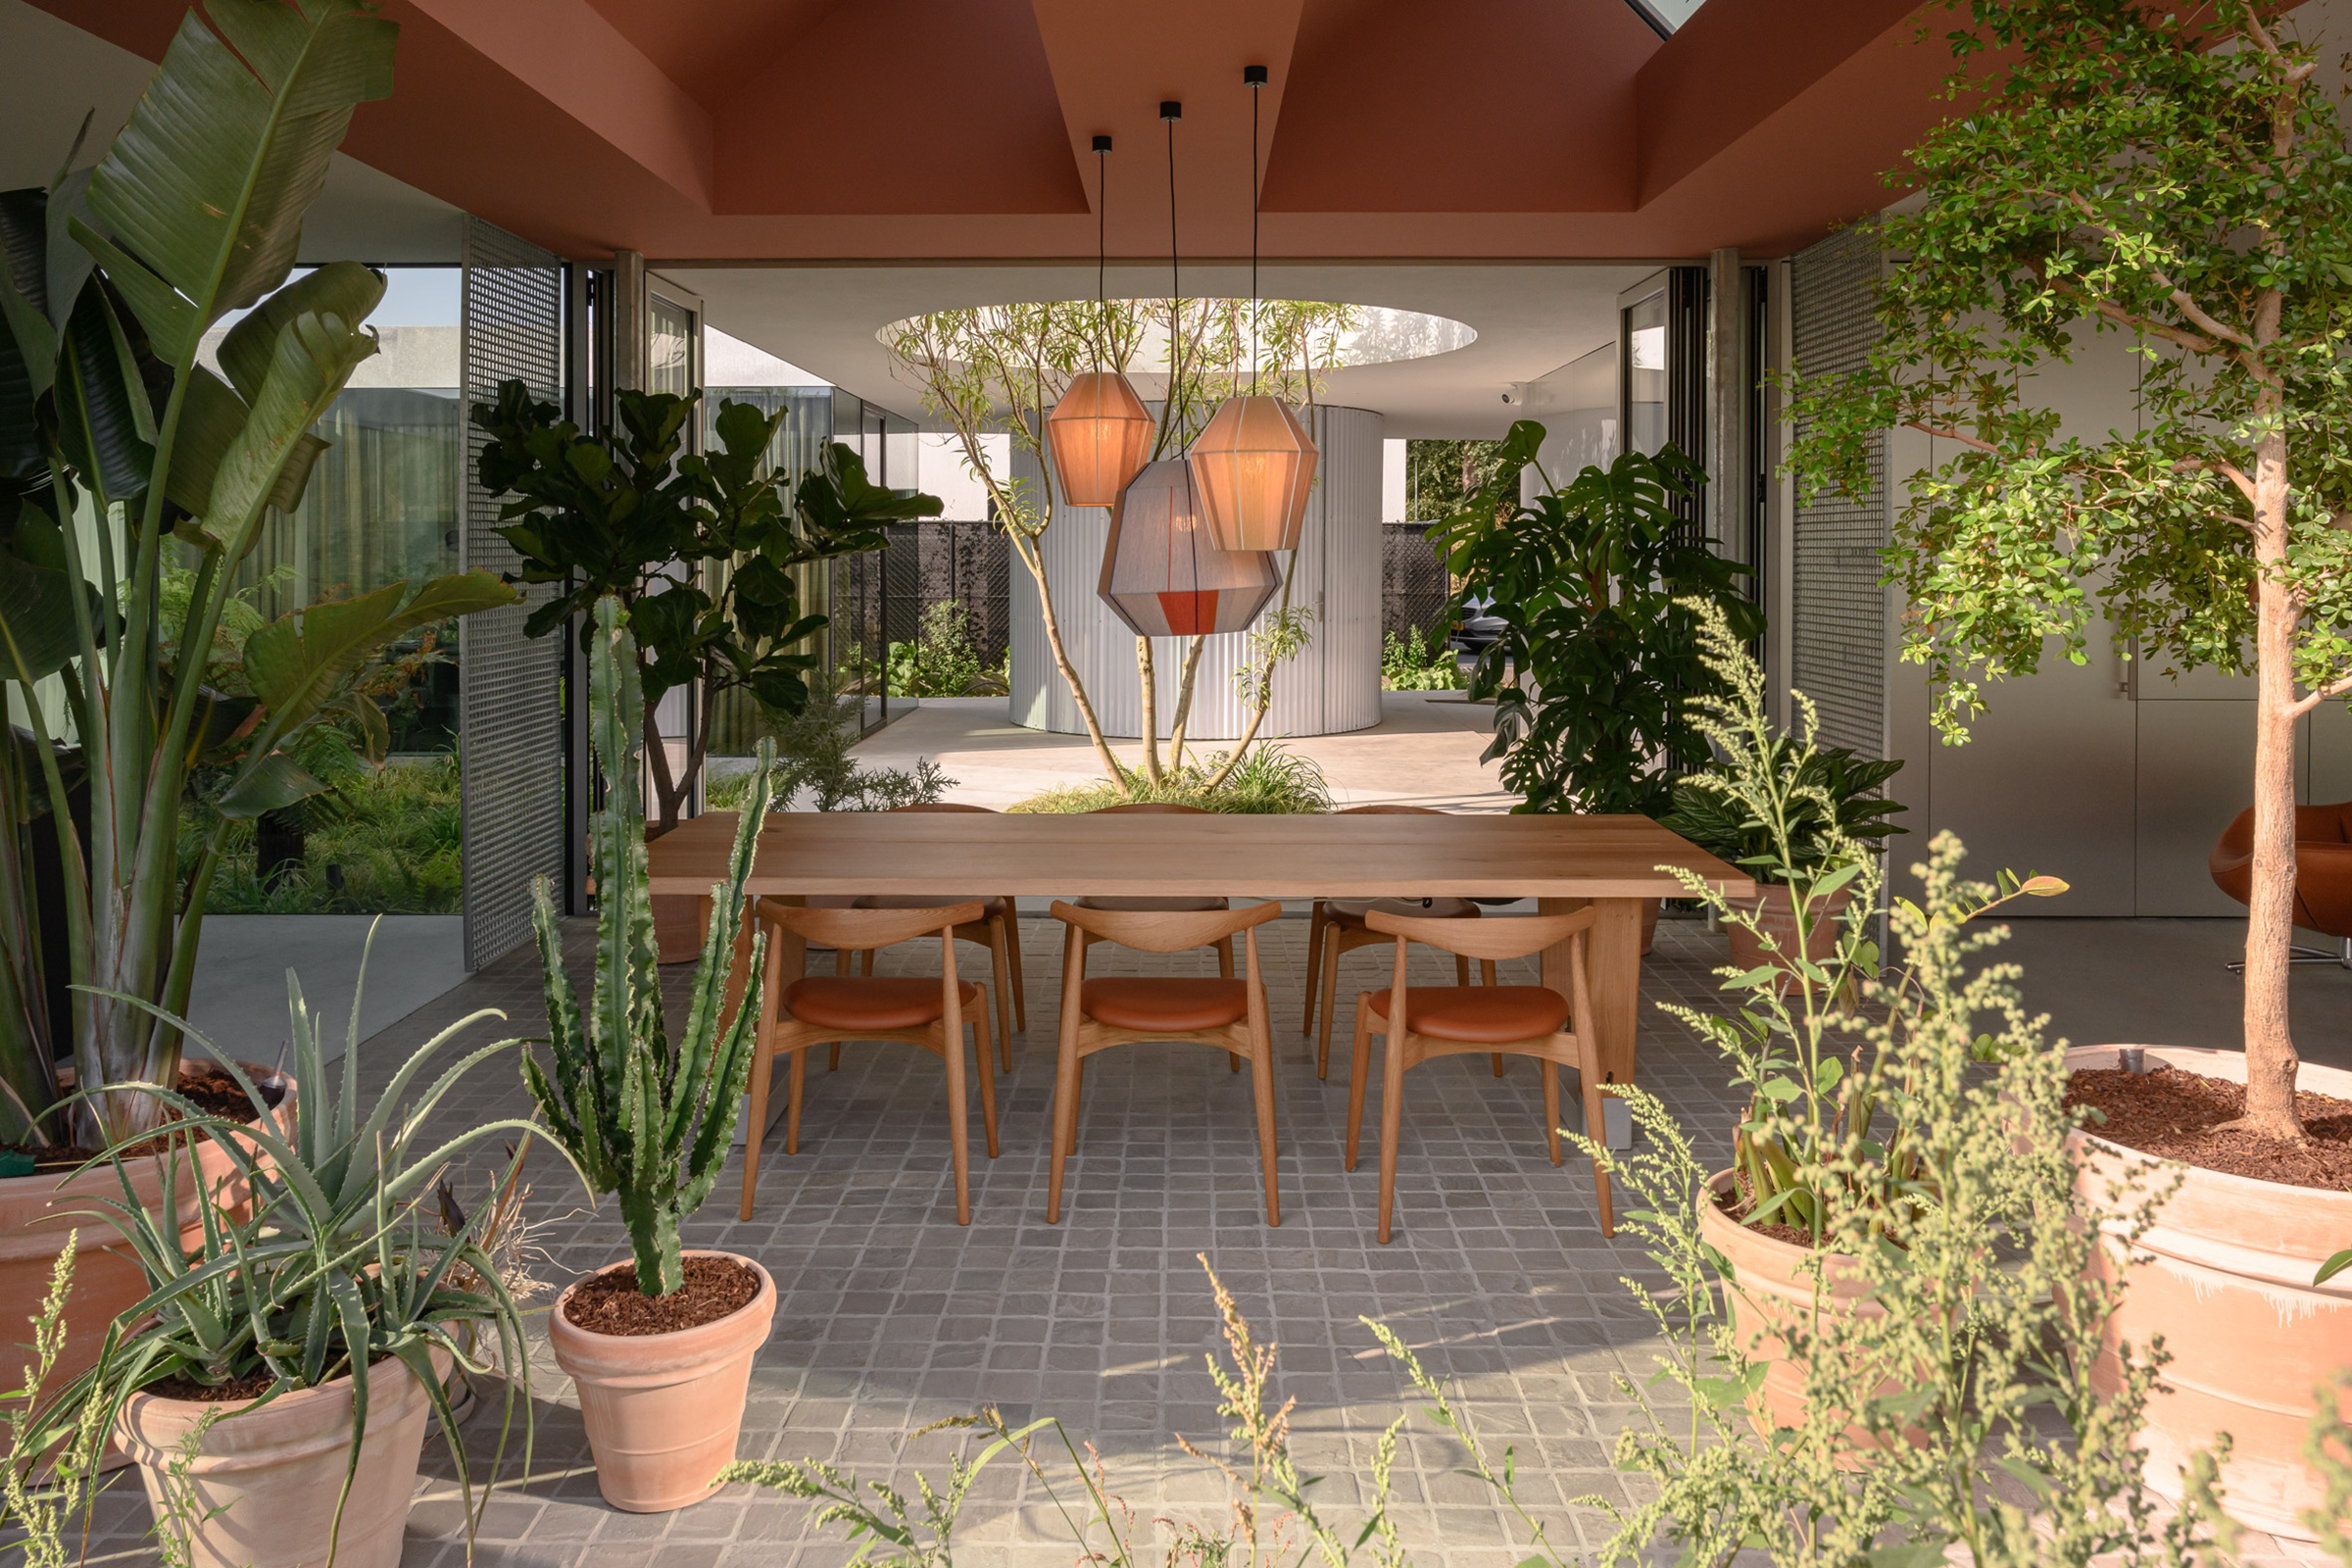 How To Stage Your Outdoor Space In These 4 Efficient Steps